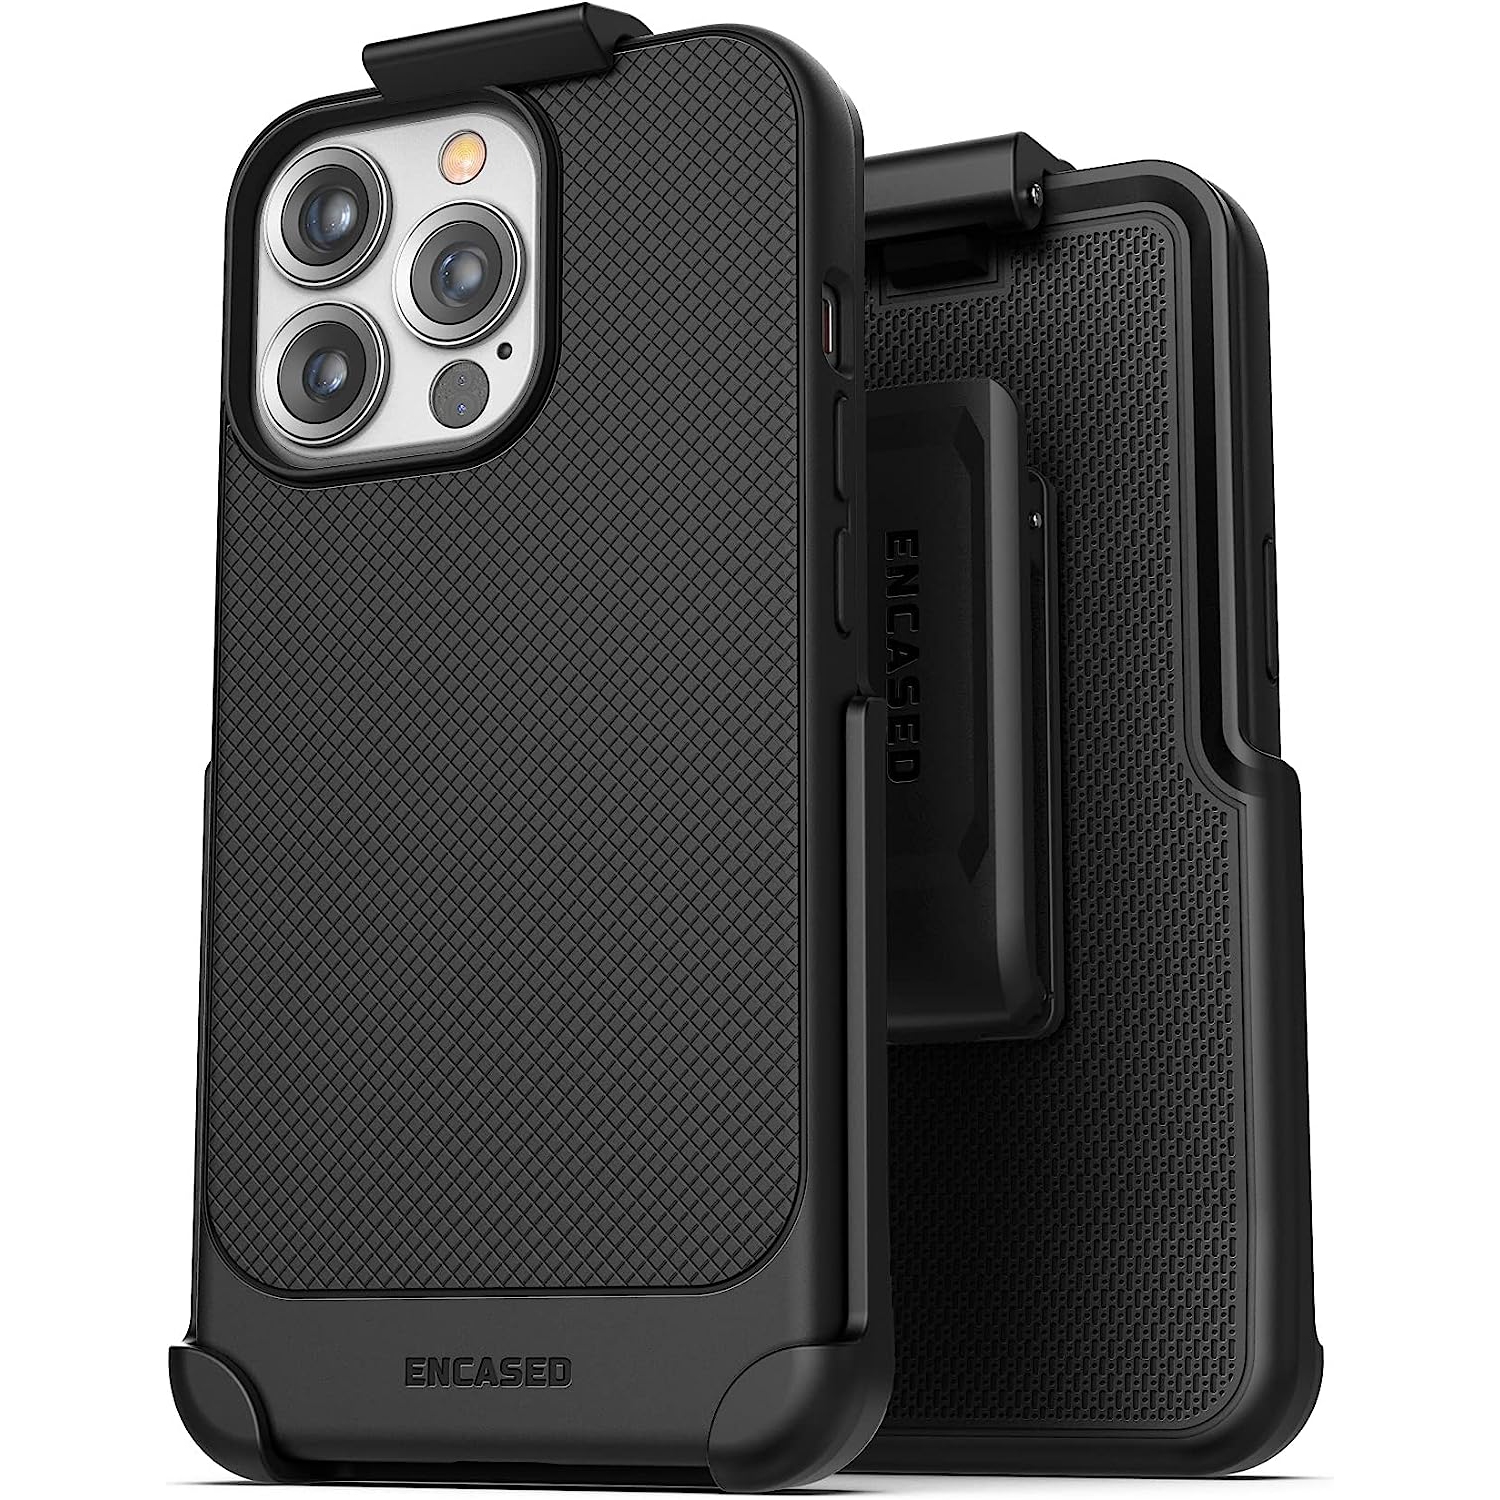 Encased Thin Armor Designed for iPhone 13 Pro Belt Clip Case, Slim Grip Phone Cover with Holster - Black